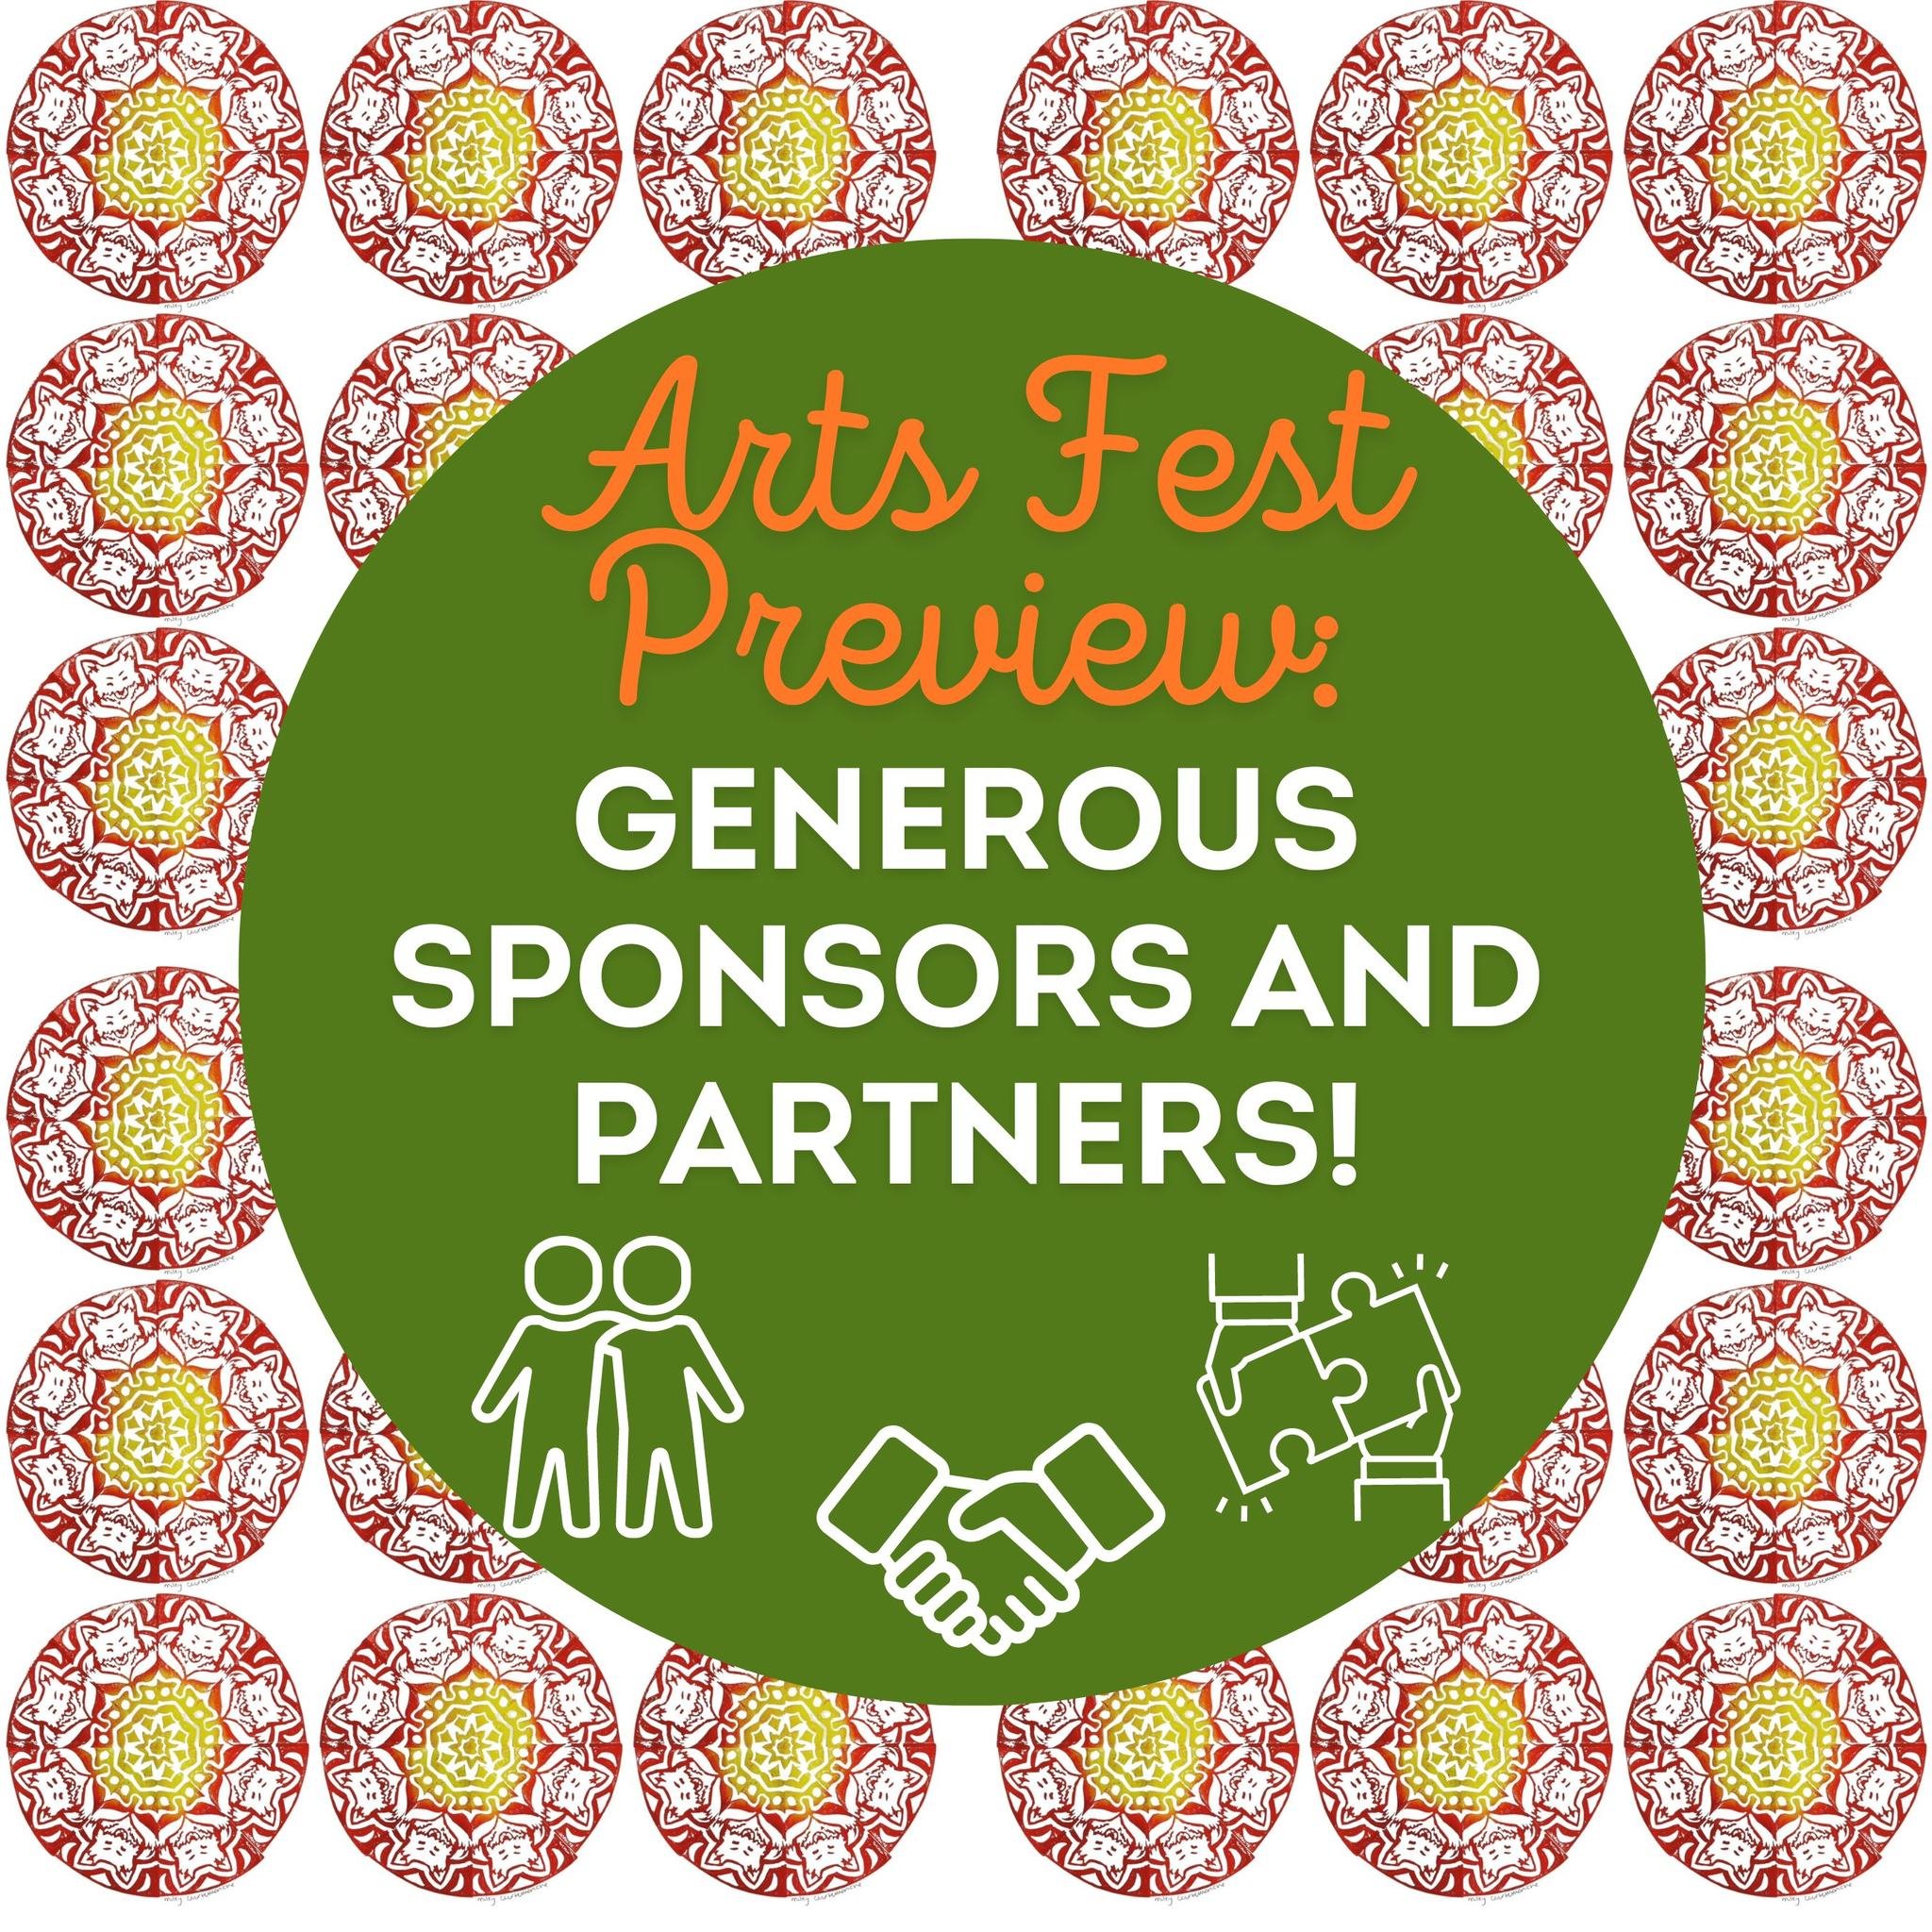 On this last day before the Arts Fest, as our teachers and students put the finishing touches on everything, we want to recognize our incredible sponsors and lead partners, without whom we could not put on this event - let alone make it FREE to the e